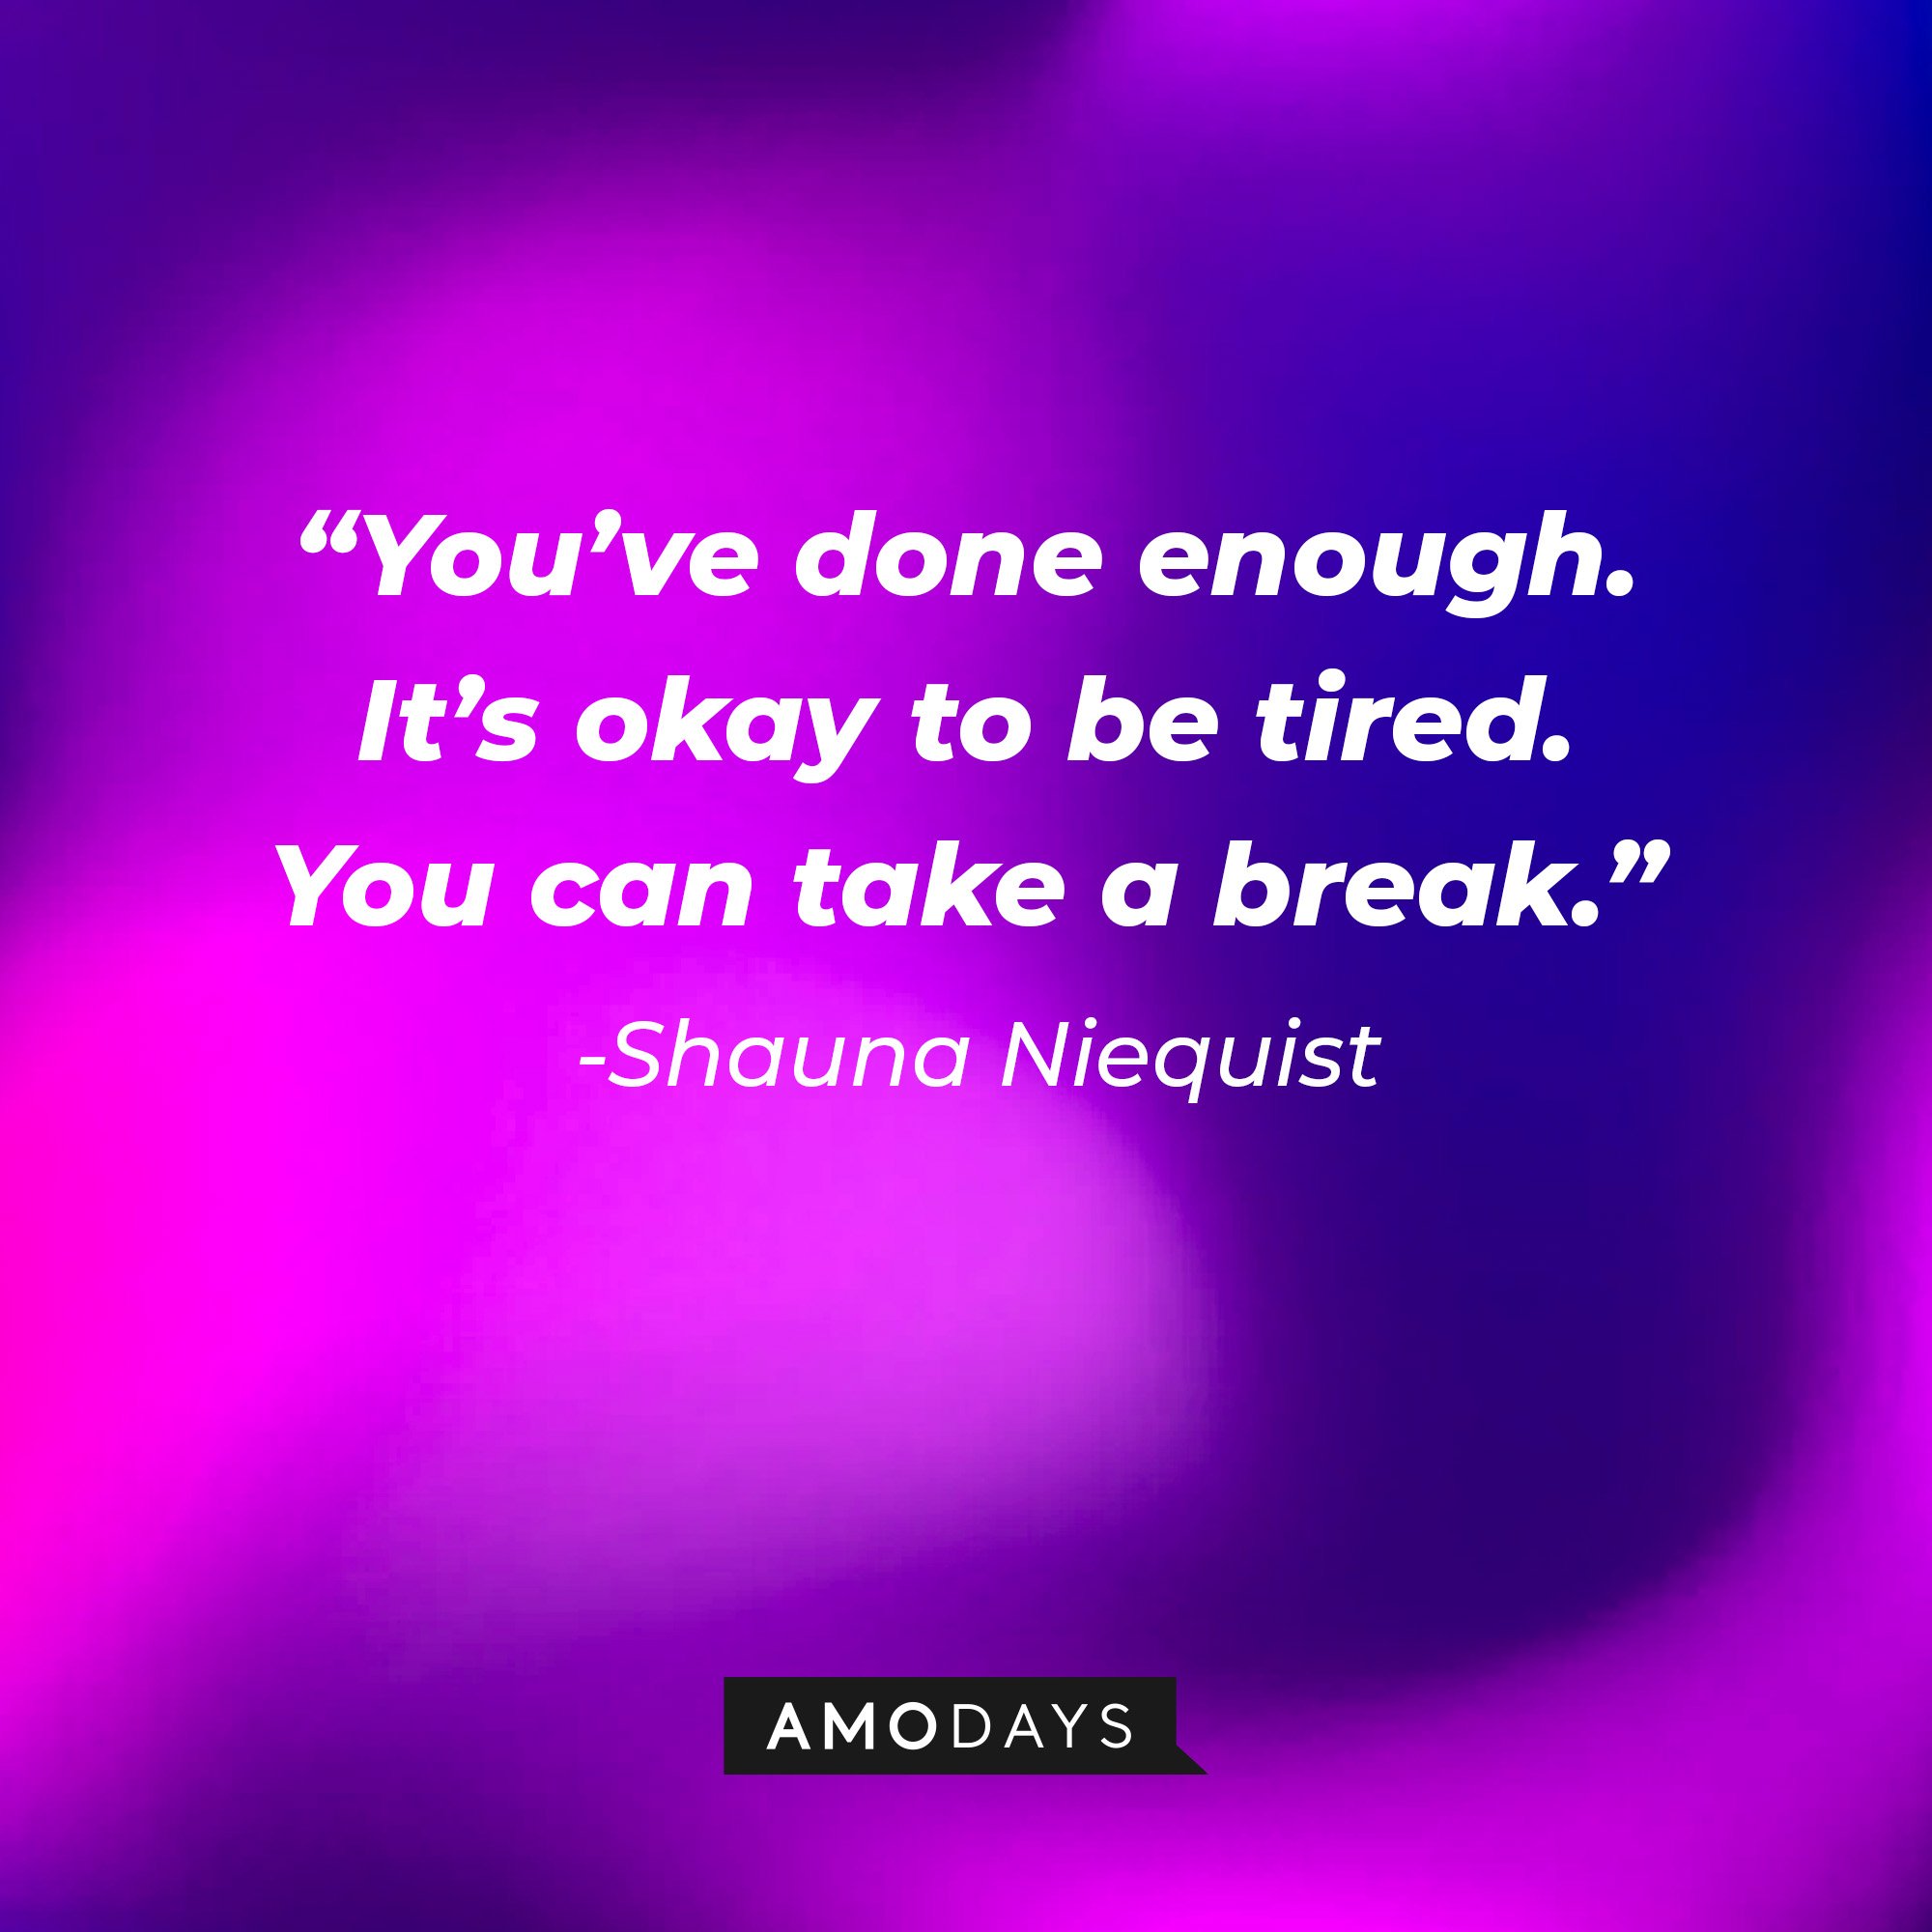 Shauna Niequist's quote: “You’ve done enough. It’s okay to be tired. You can take a break.” | Image: AmoDays